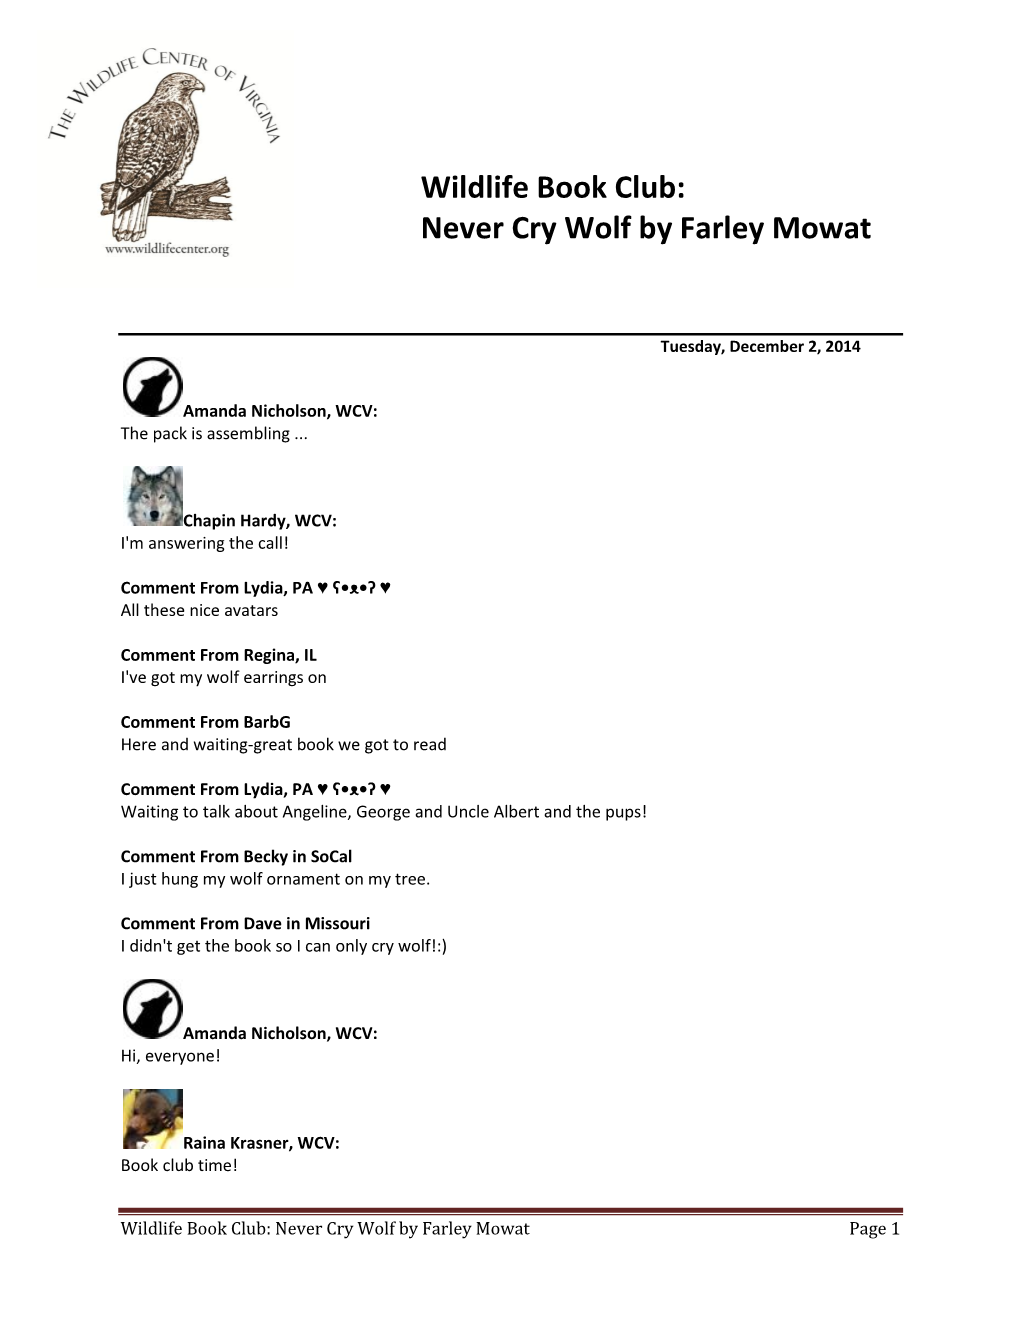 Wildlife Book Club: Never Cry Wolf by Farley Mowat